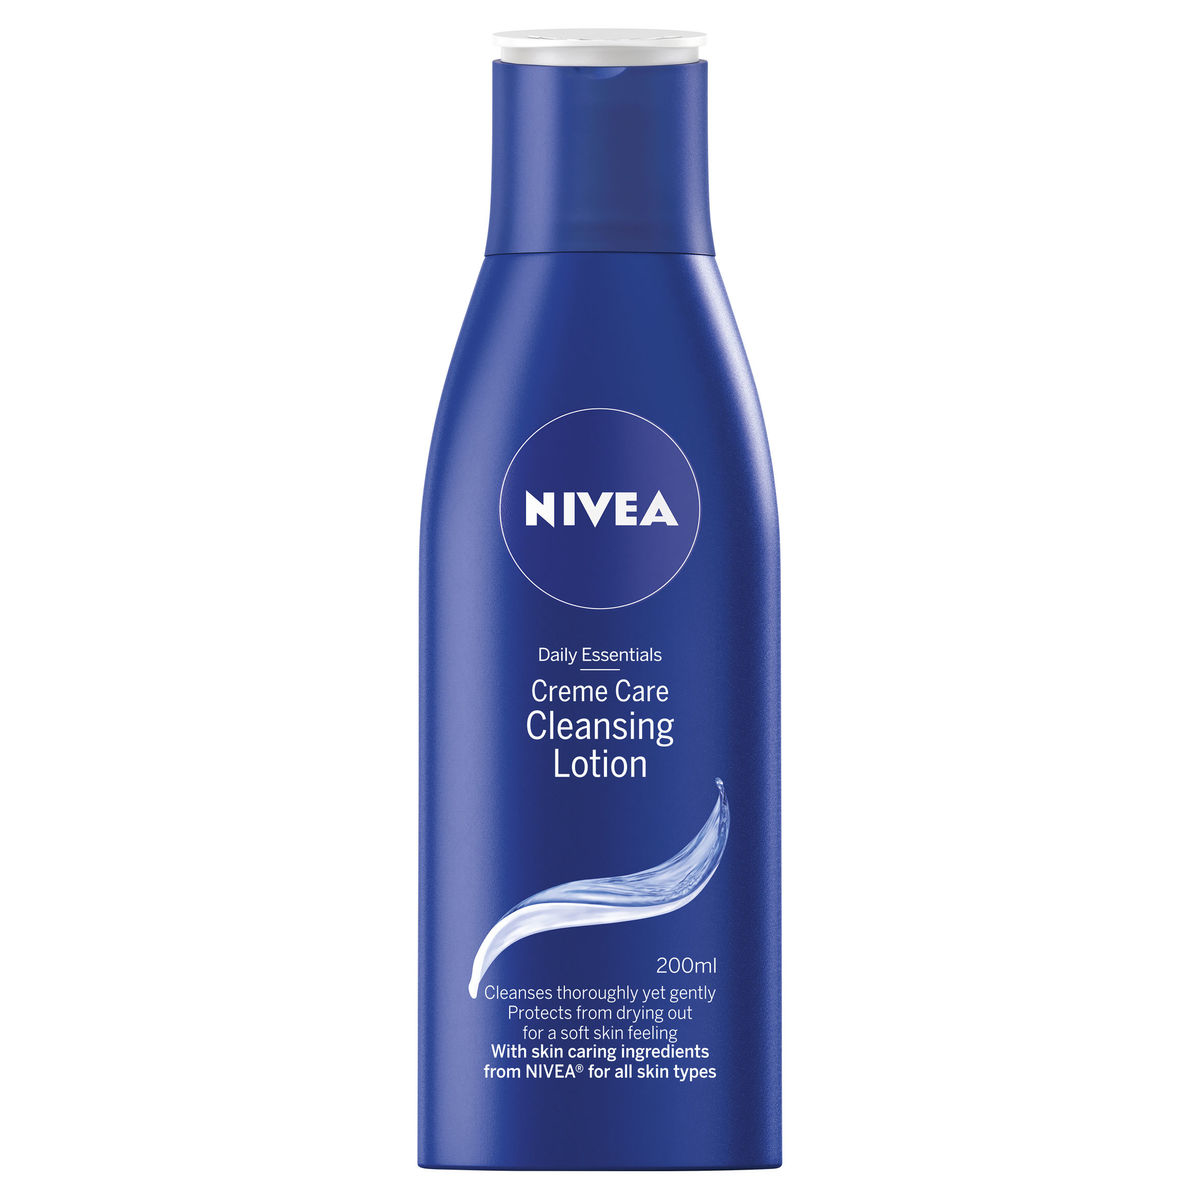 Nivea Daily Essentials Creme Care Cleansing Lotion 200ml